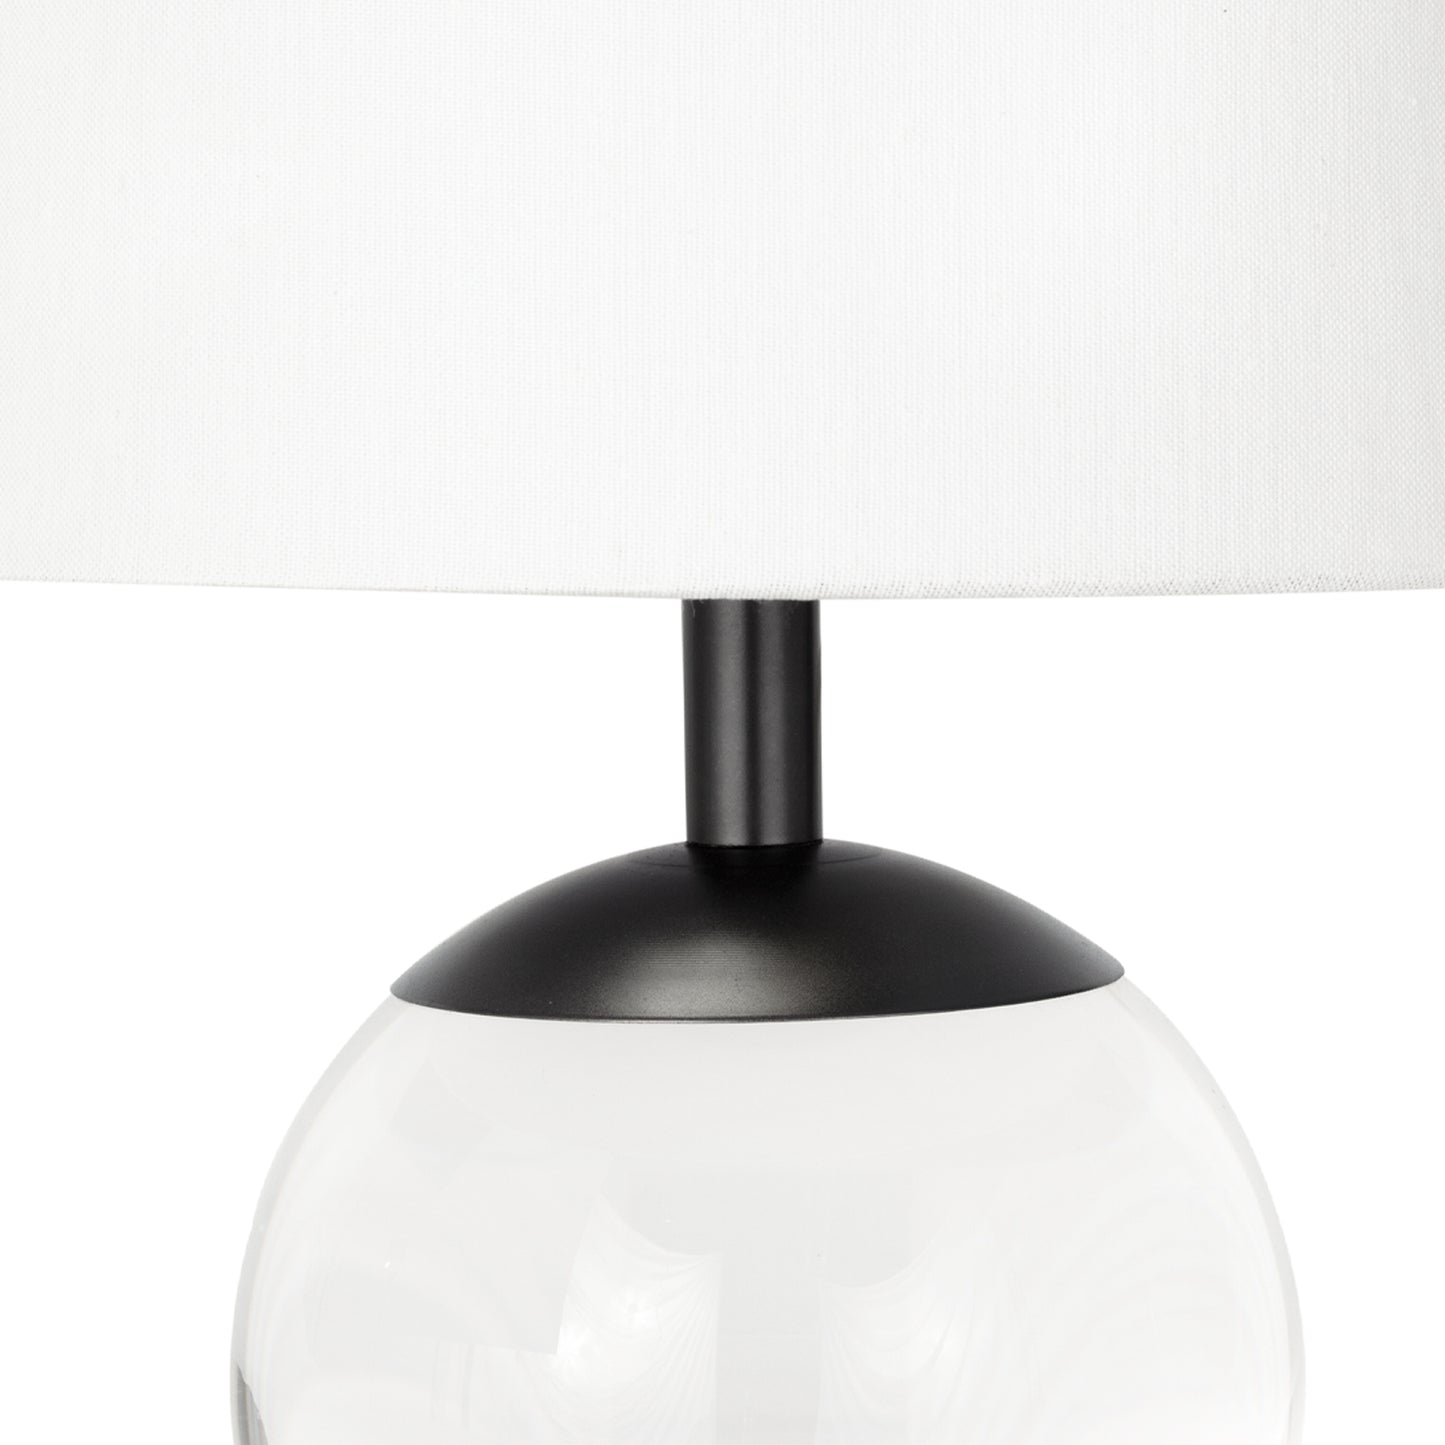 Christie Crystal Mini Lamp by Southern Living